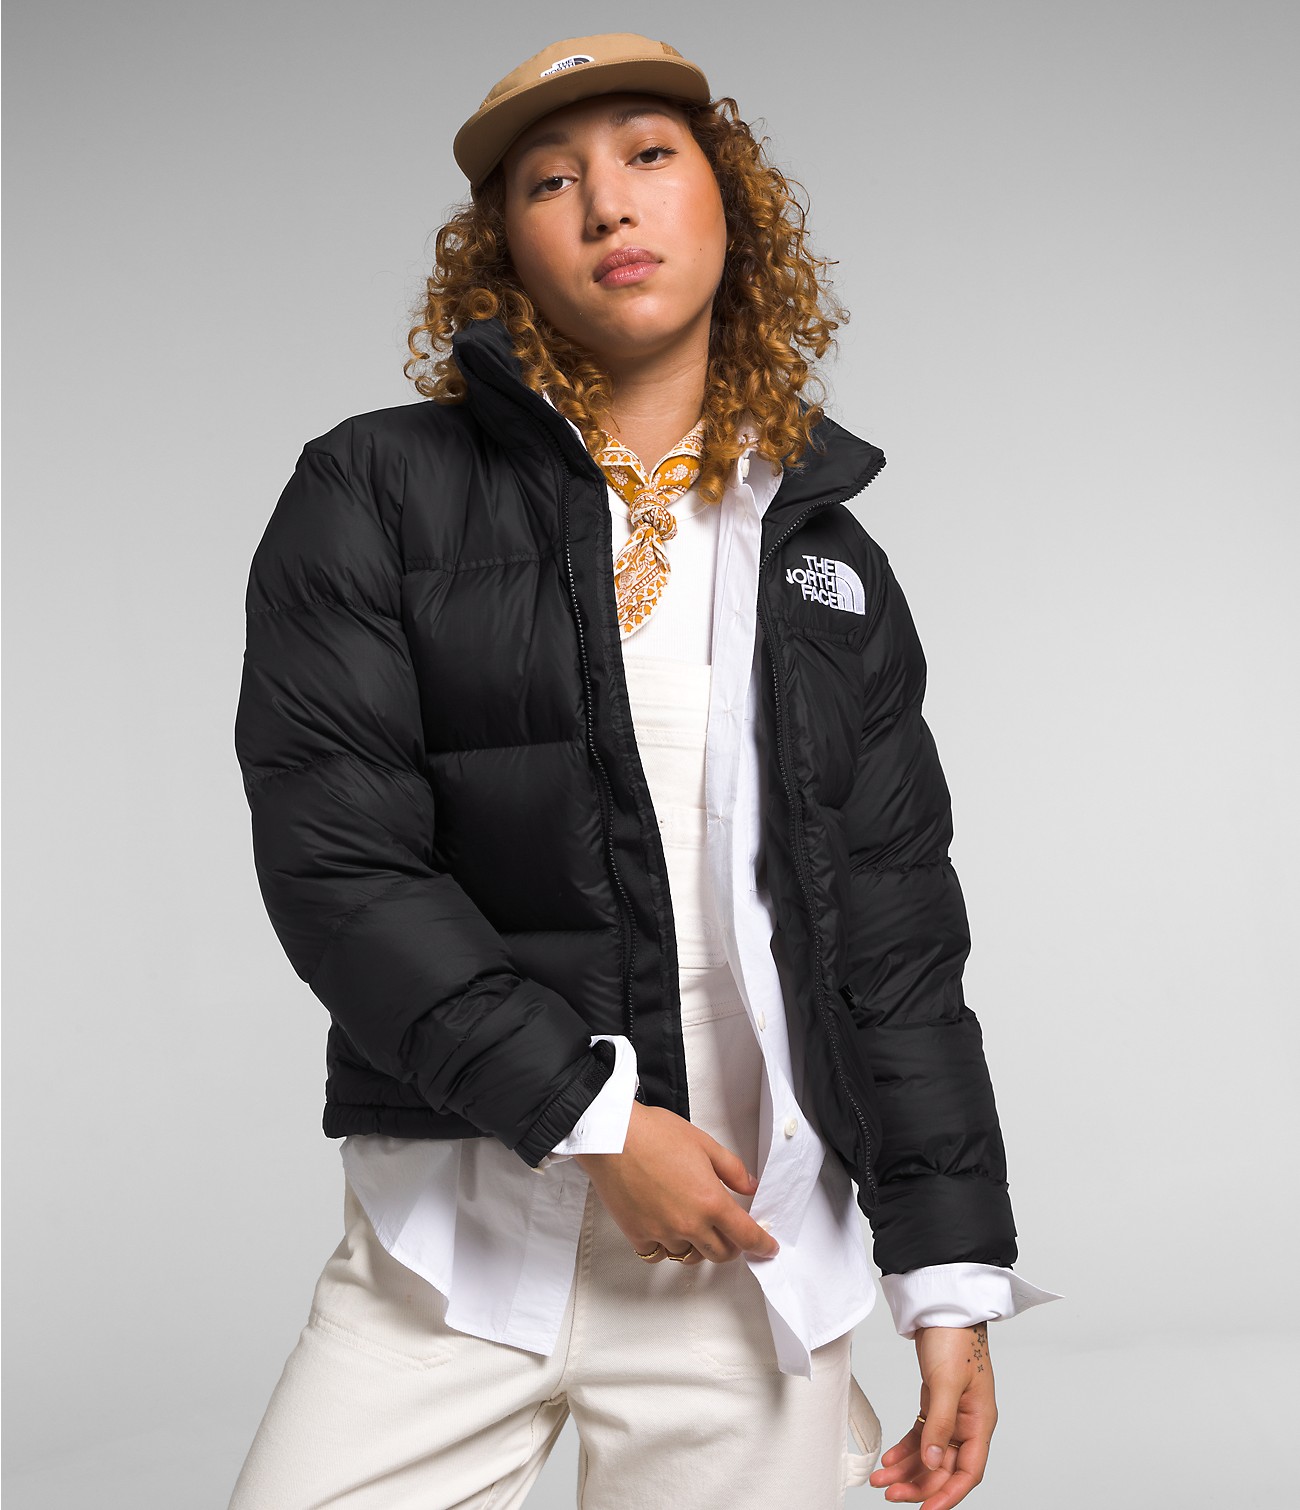 Unlock Wilderness' choice in the Lululemon Vs North Face comparison, the 1996 Retro Nuptse Jacket by The North Face